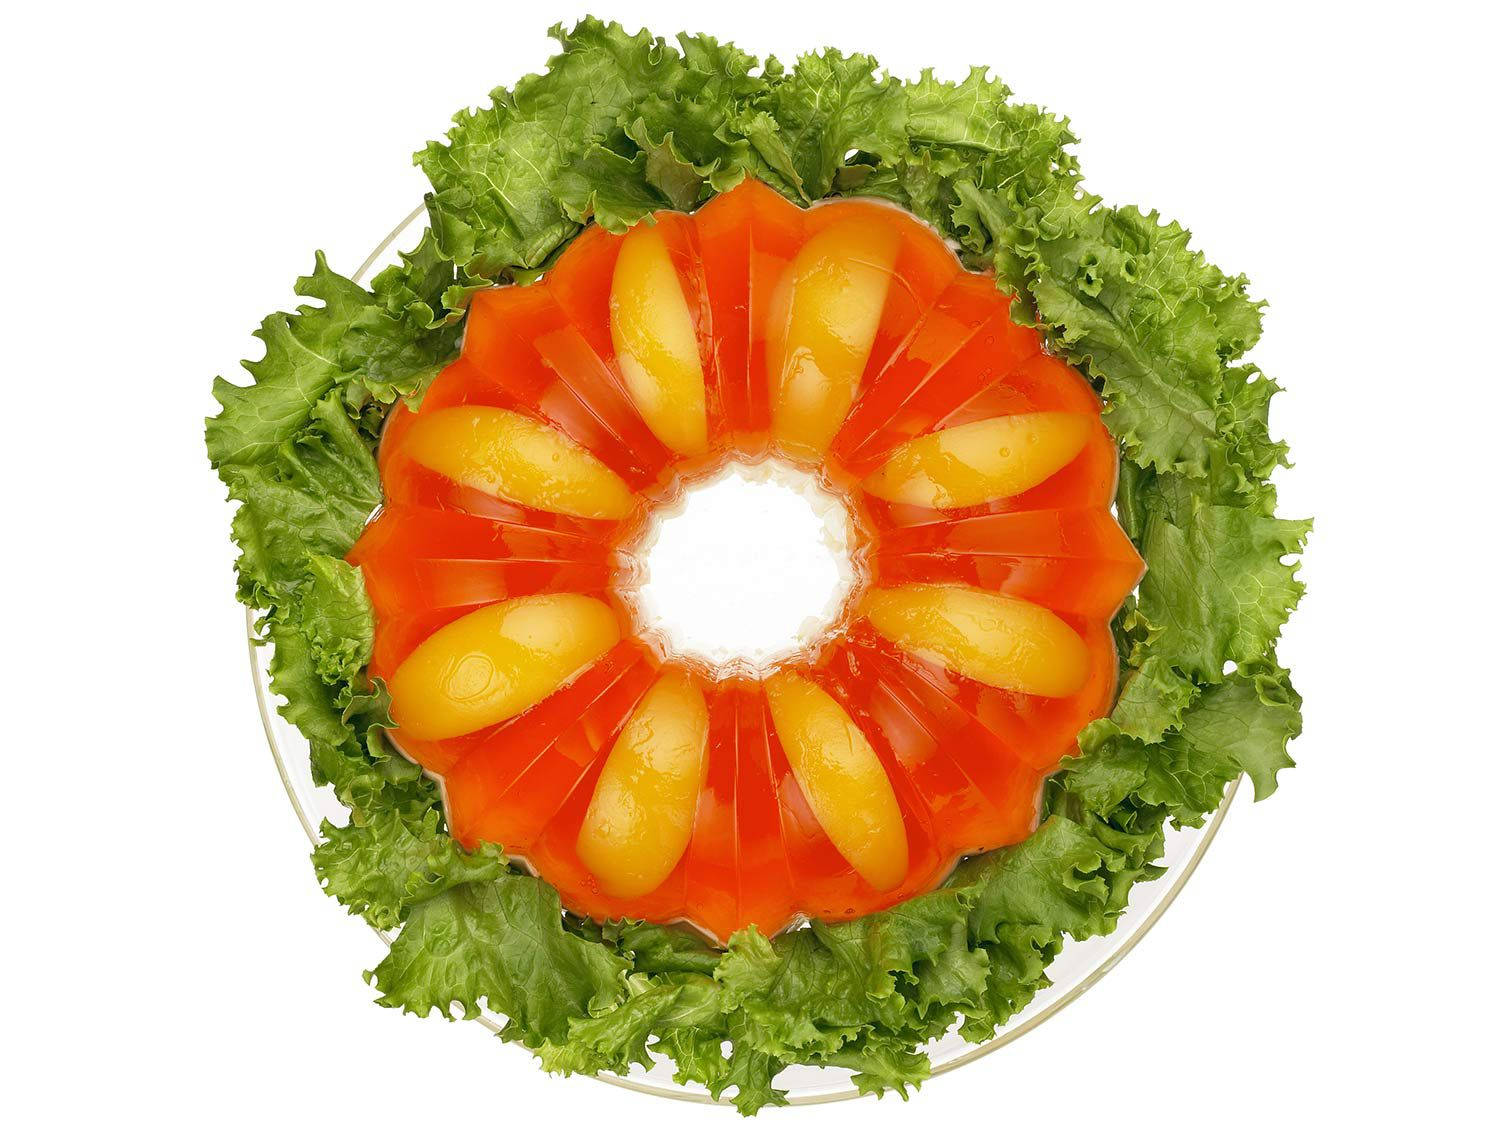 Famous Jell-o Salad Background